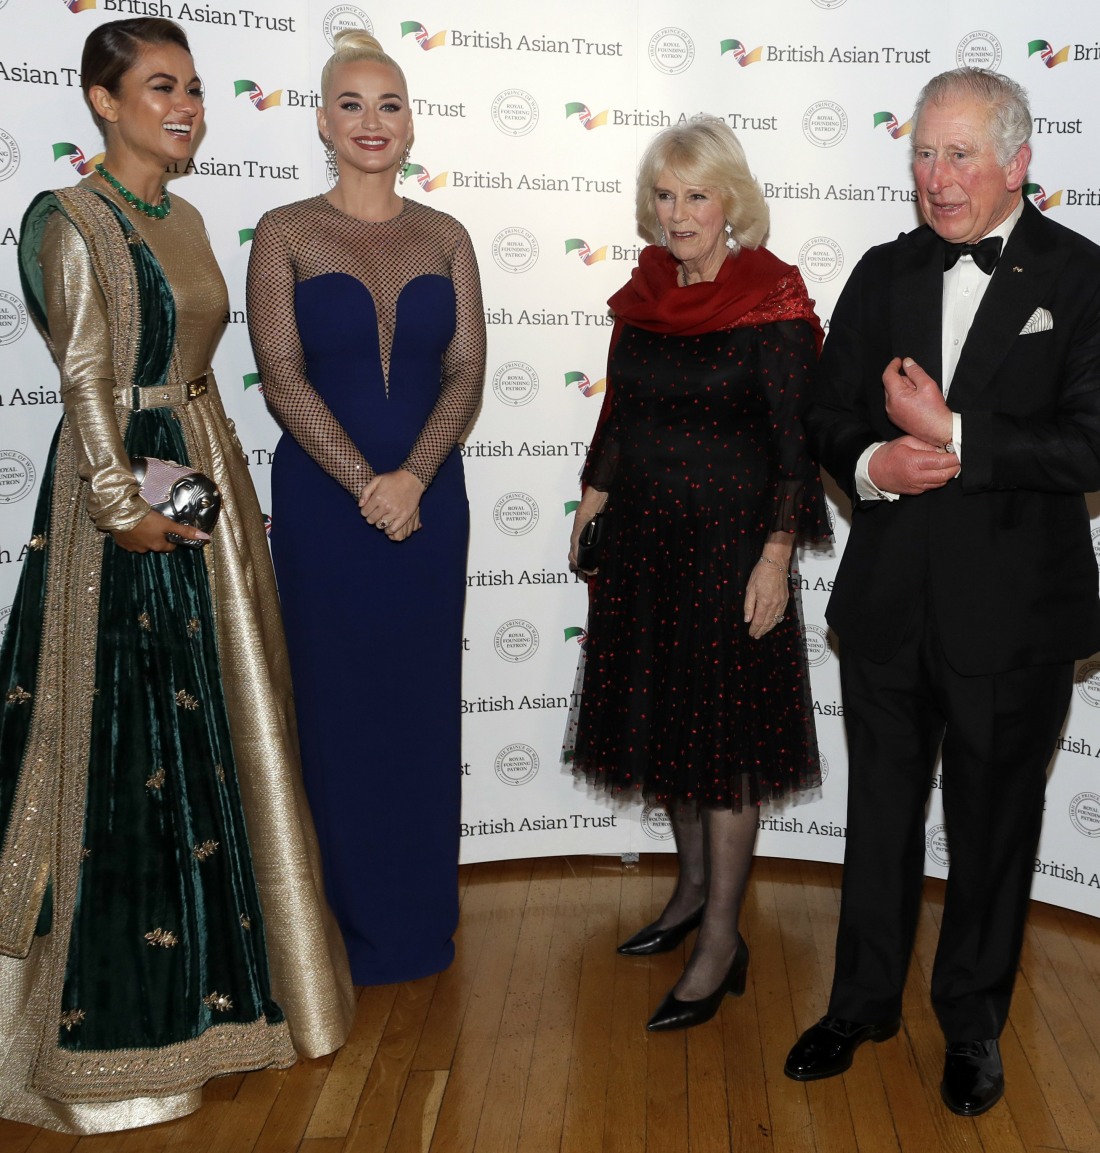 Britain's Prince Charles, Royal Founding Patron of the British Asian Trust, and his wife Camilla, Duchess of Cornwall, meet musician American Katy Perry, second left, and Indian businesswoman Natasha Poonawalla, left, as they arrive to attend a reception for supporters of the British Asian Trust in London, Tuesday, Feb. 4, 2020.